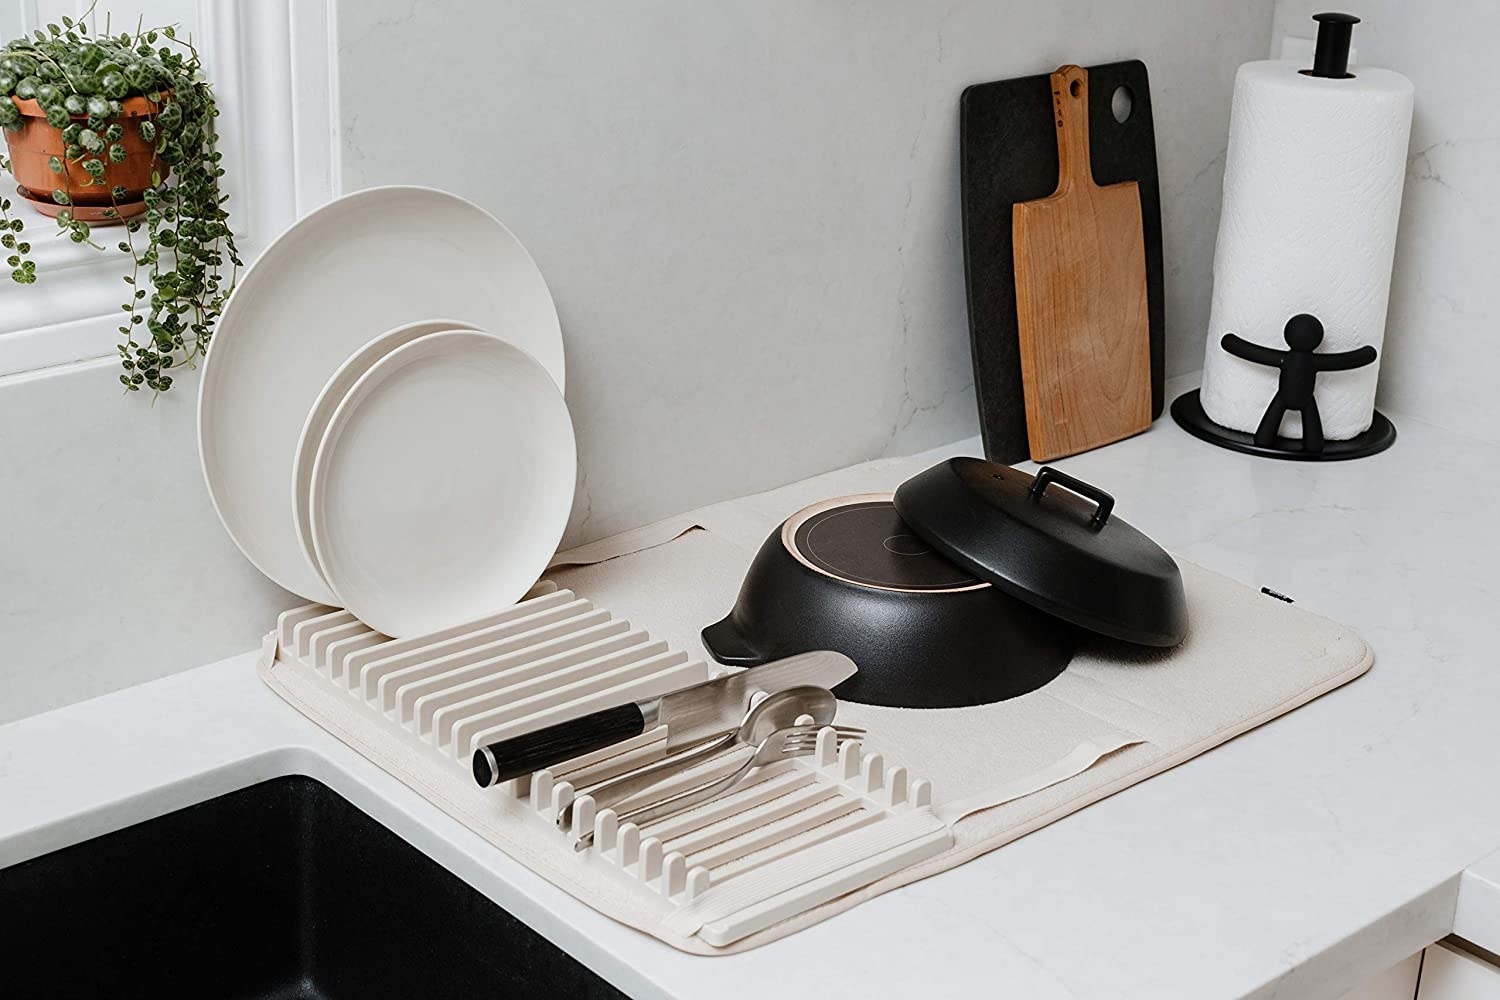 The dish mat on a counter with several pots, pans, and dishes on it